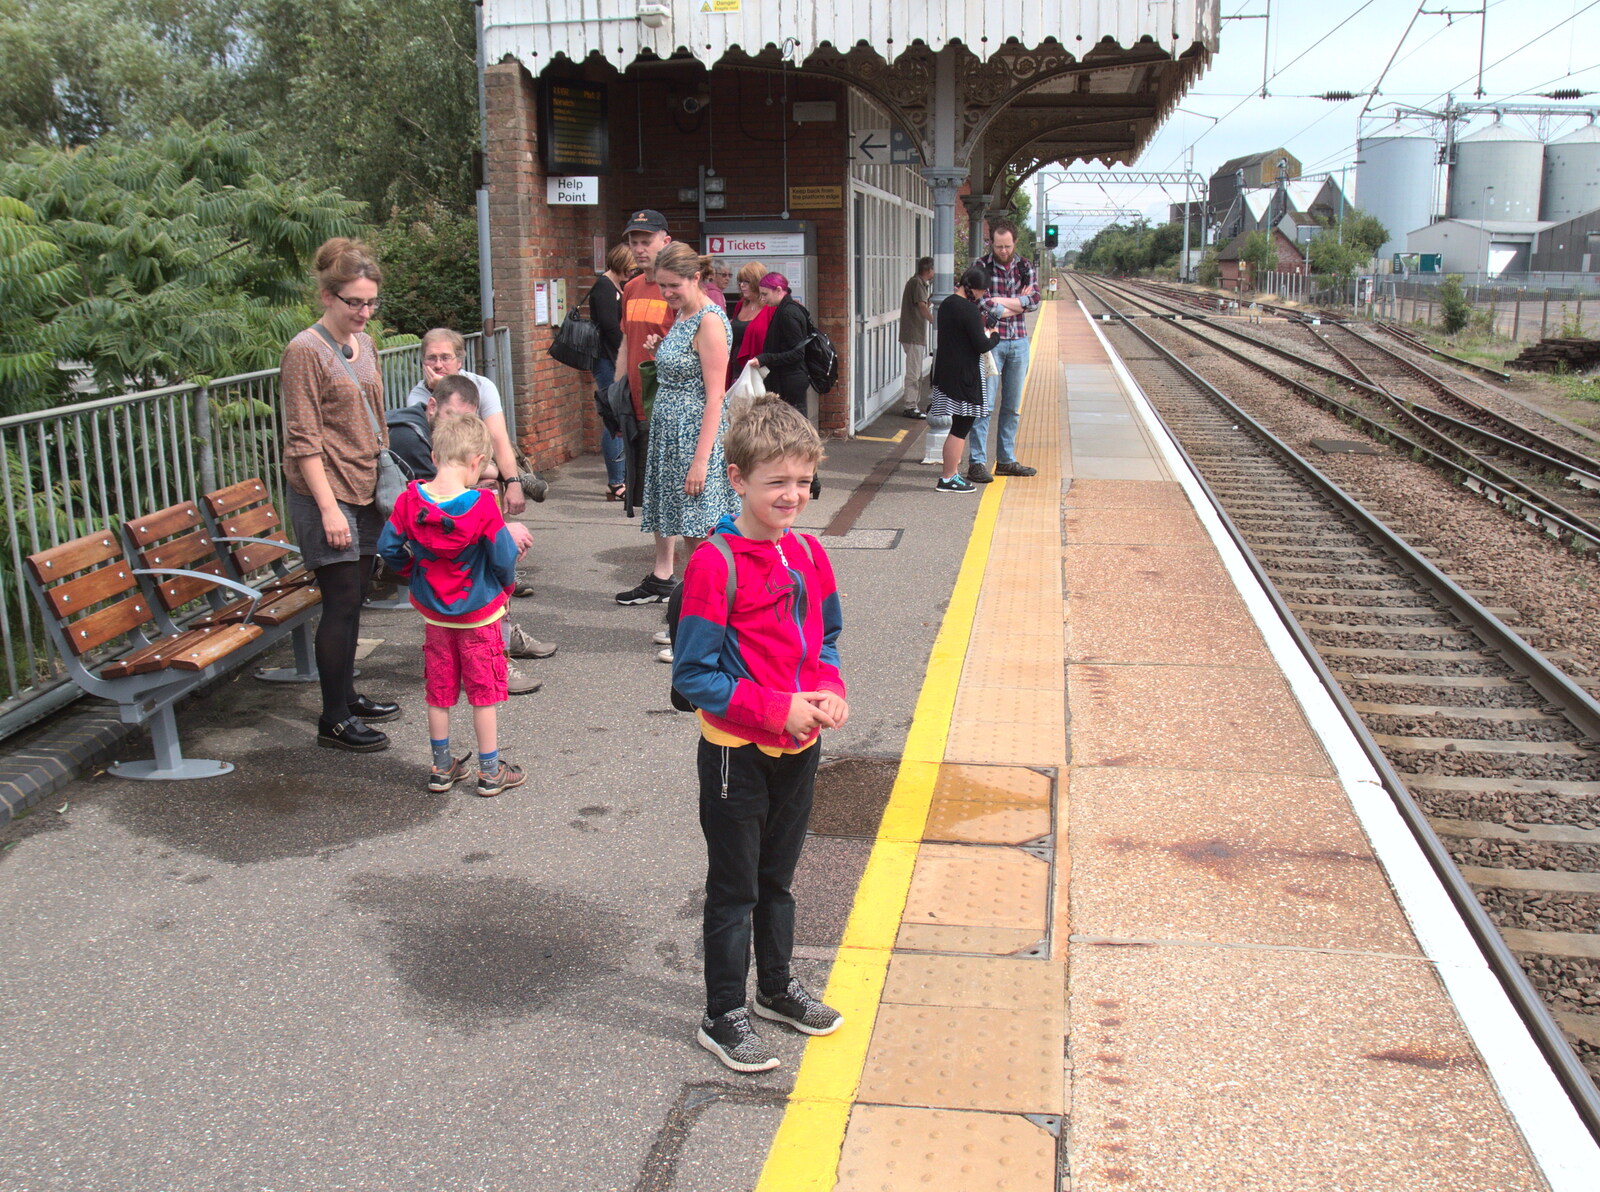 Fred and the gang on the platform at Diss from The Humpty Dumpty Beer Festival, Reedham, Norfolk - 22nd July 2017